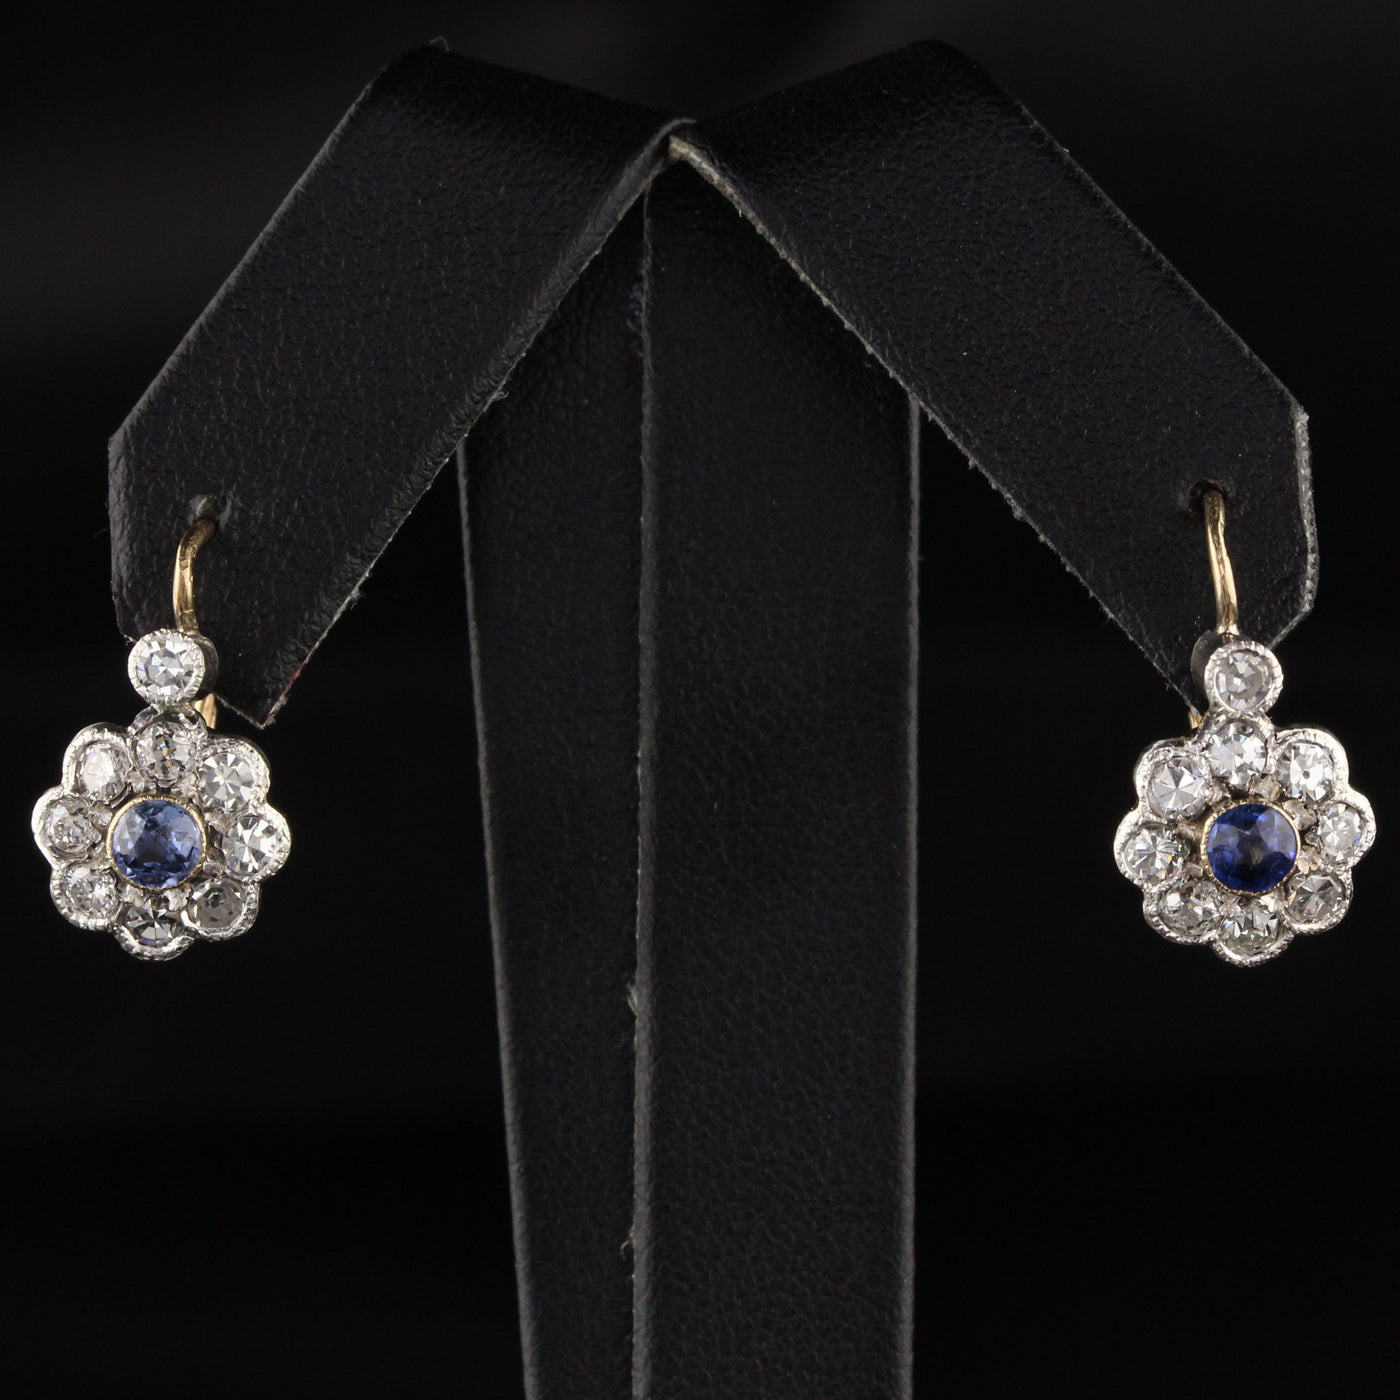 Antique Victorian 14K Yellow Gold Single Cut Diamond and Sapphire Drop Earrings